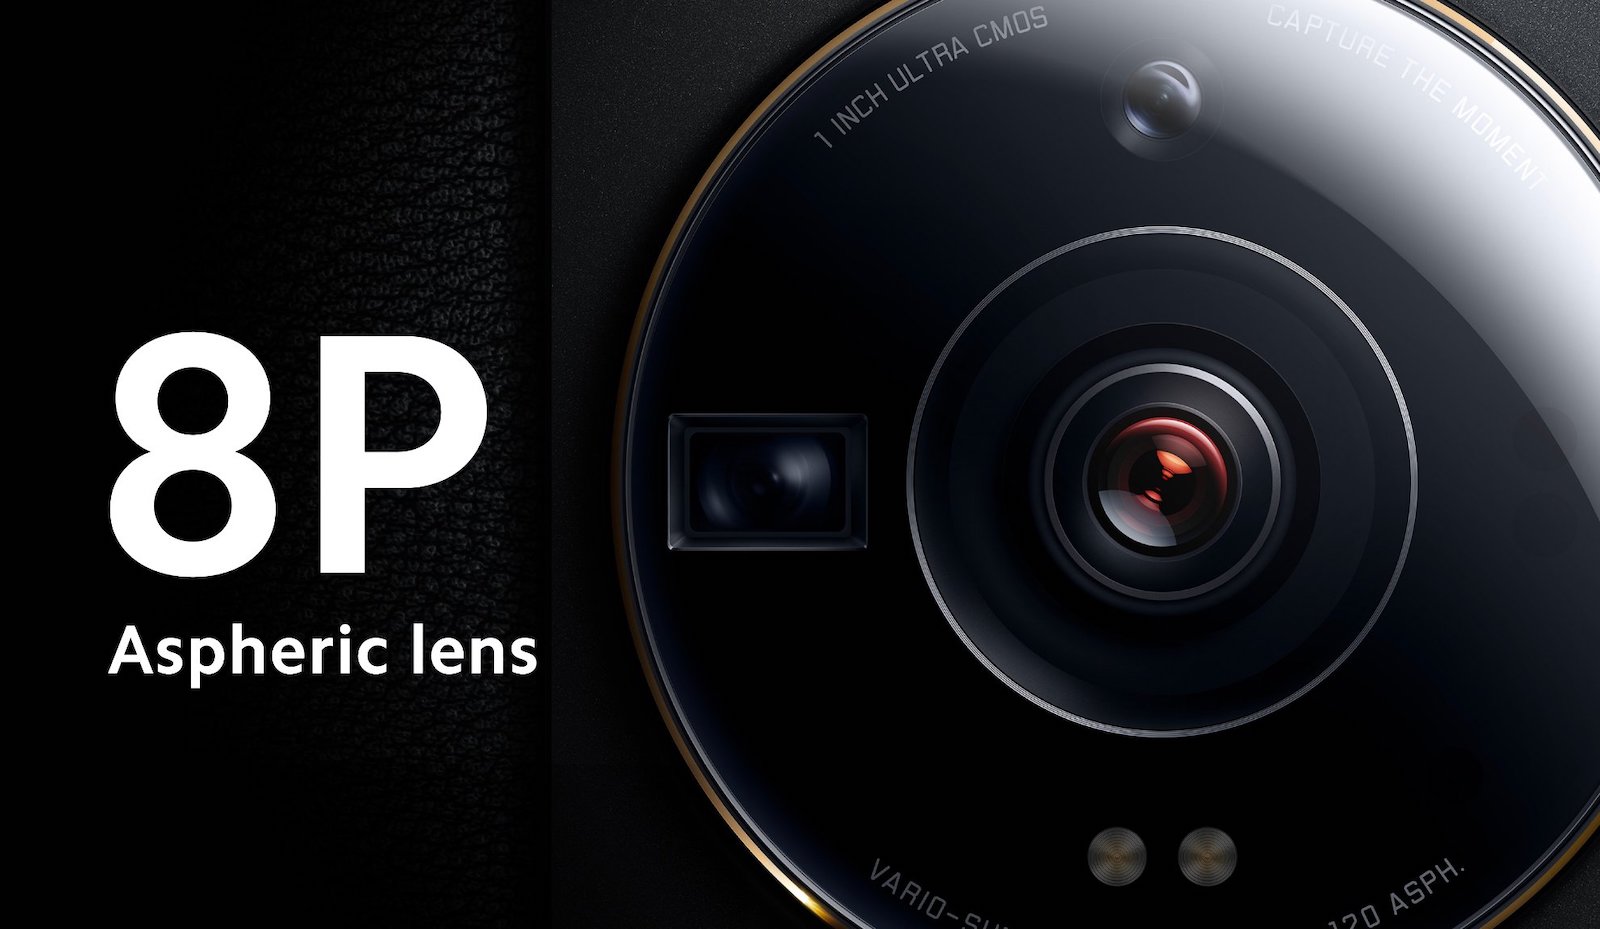 Xiaomi 12S Ultra: where is the Leica Vario-Summicron zoom? by Jose